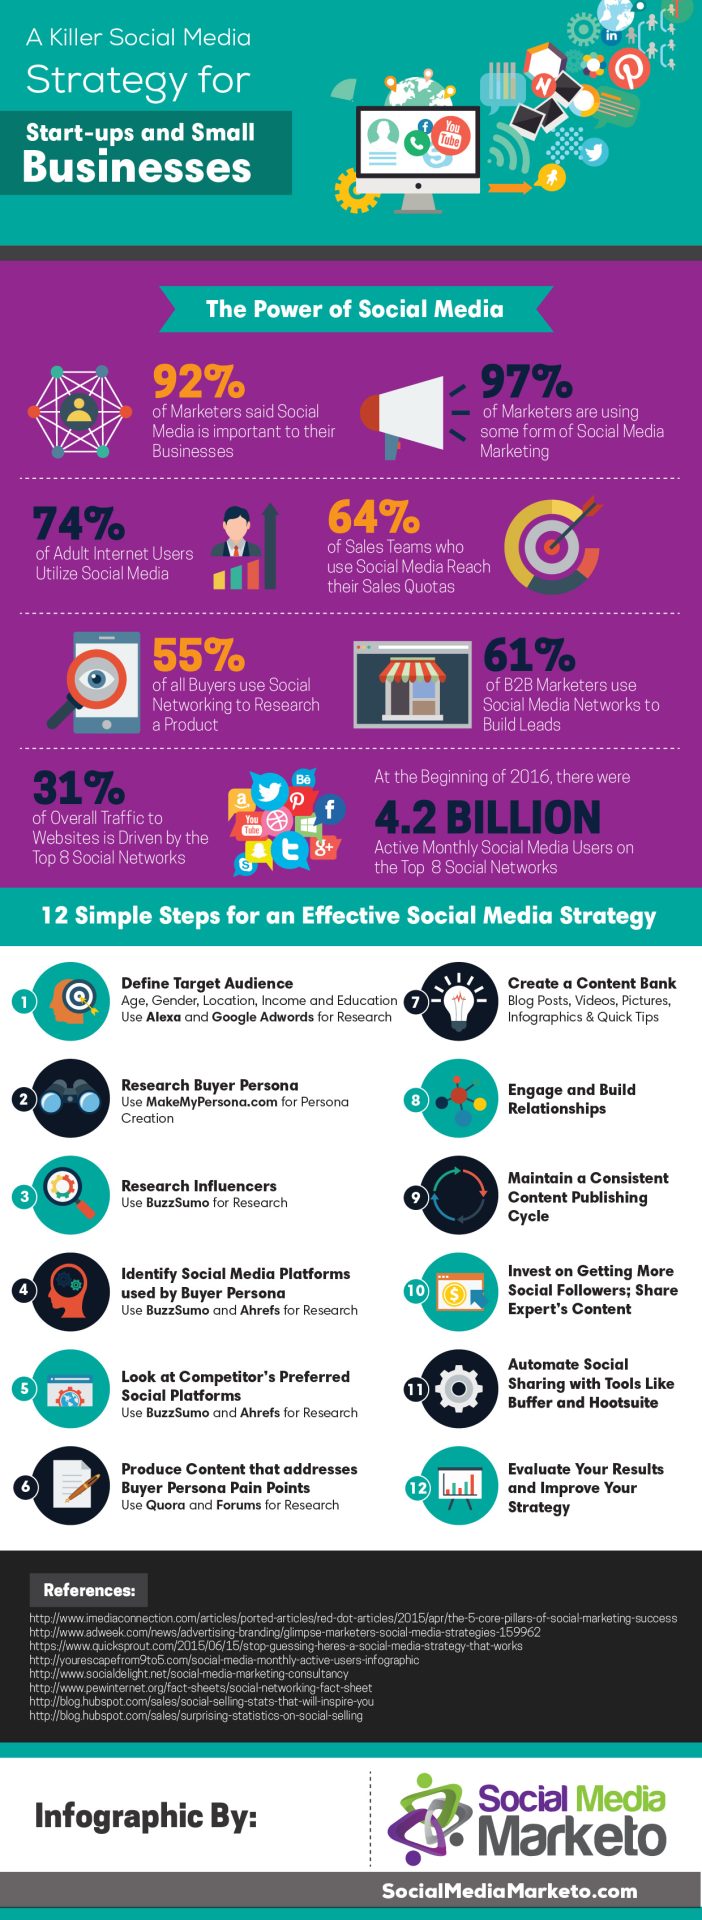 A-Killer-Social-Media-Marketing-Strategy-for-Startups-and-Small-Businesses-Infographic.jpg